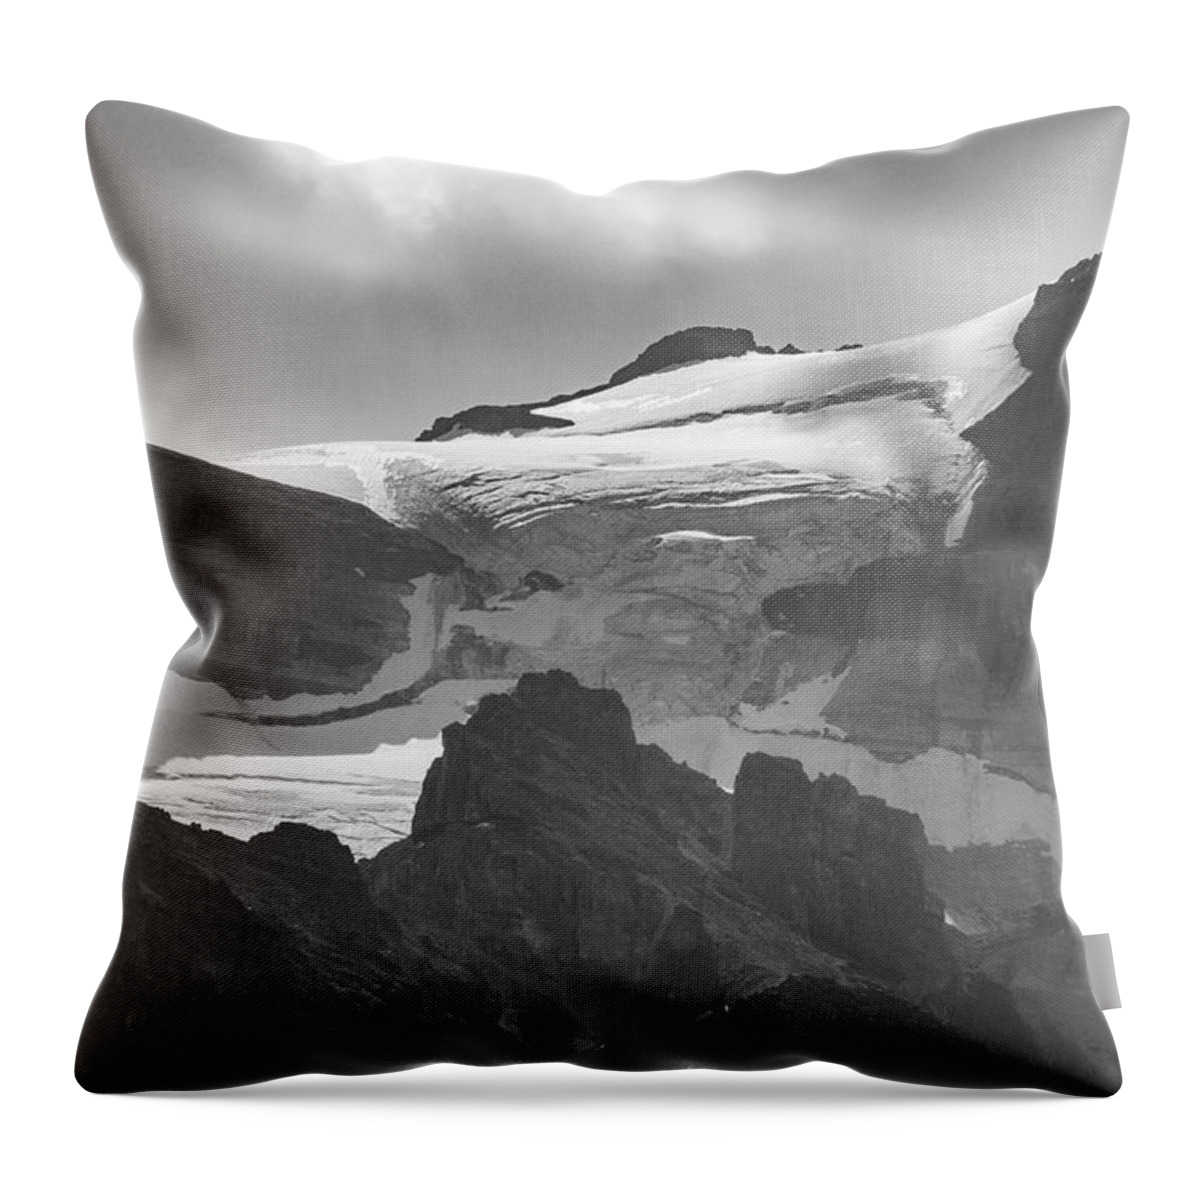 Black Color Throw Pillow featuring the photograph Hanging Glaciers In Alberta by Mraust